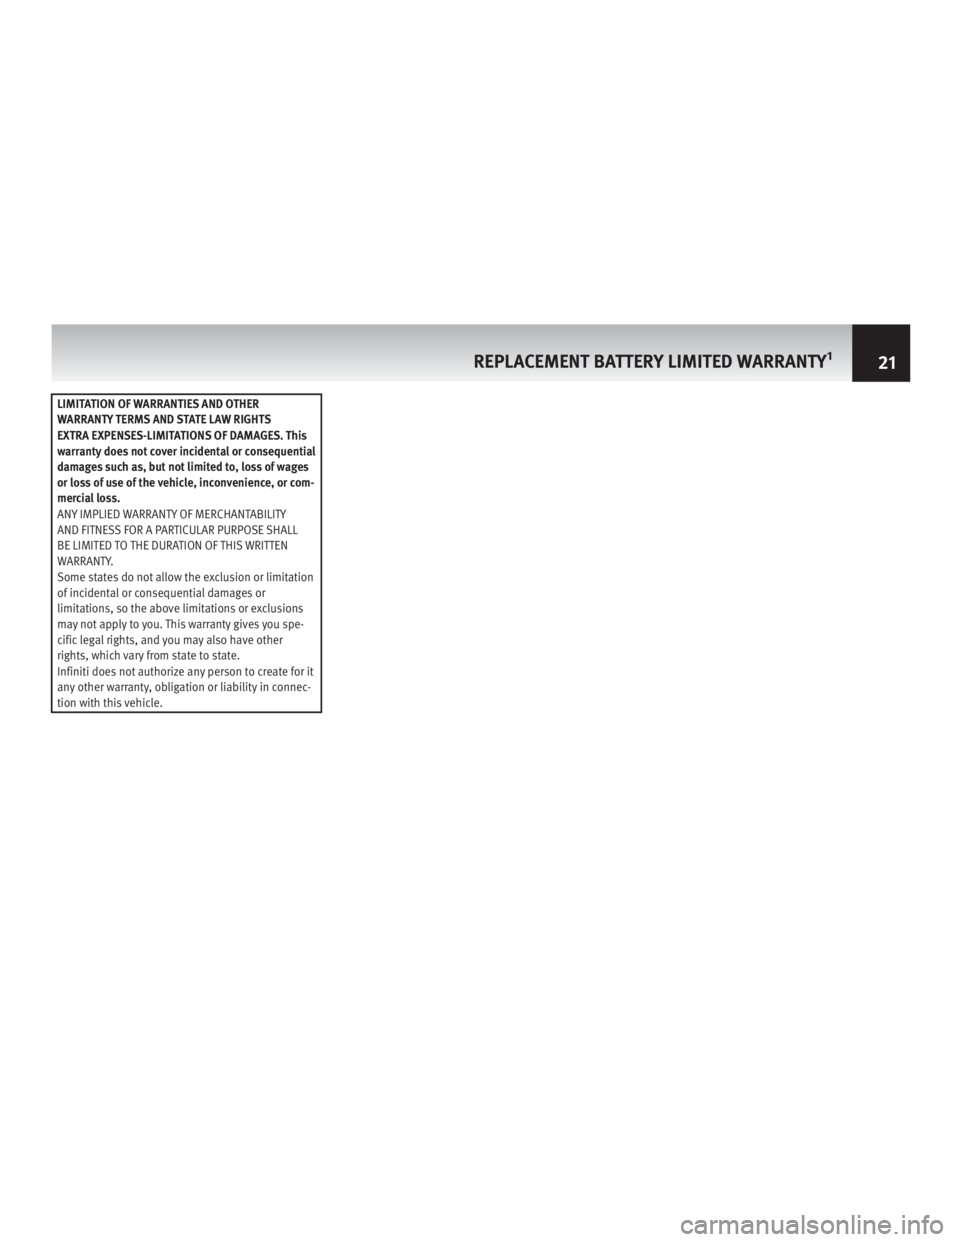 INFINITI Q50 2017  Warranty Information Booklet LIMITATION OF WARRANTIES AND OTHER
WARRANTY TERMS AND STATE LAW RIGHTS
EXTRA EXPENSES-LIMITATIONS OF DAMAGES. This
warranty does not cover incidental or consequential
damages such as, but not limited 